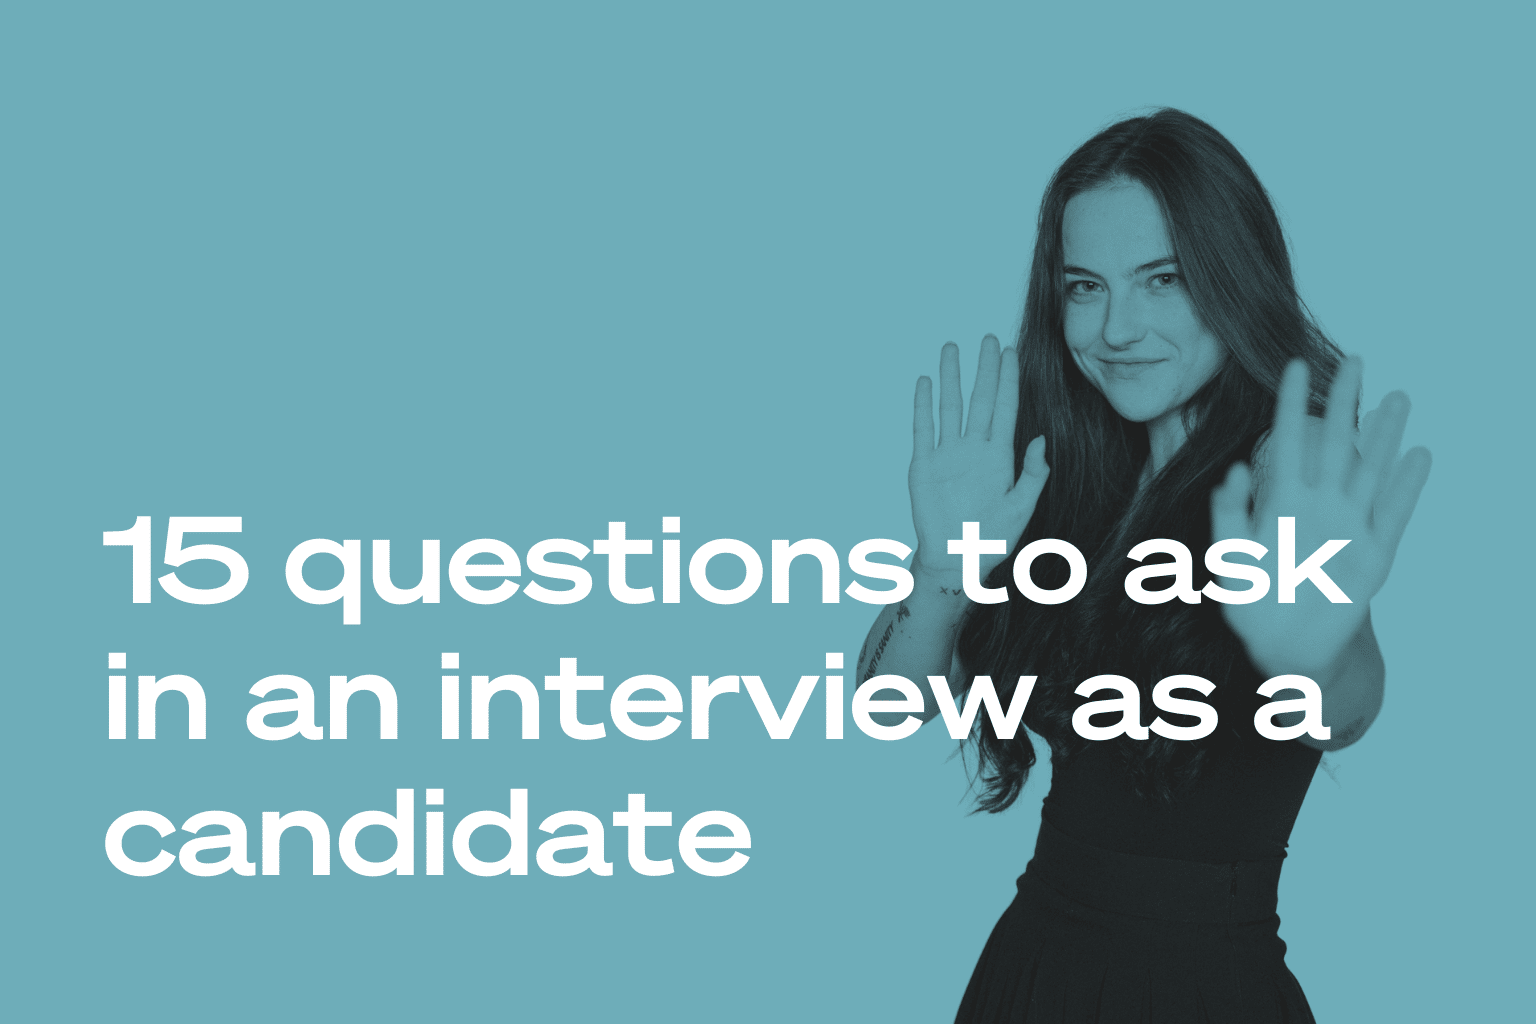 15 questions to ask in an interview as a candidate